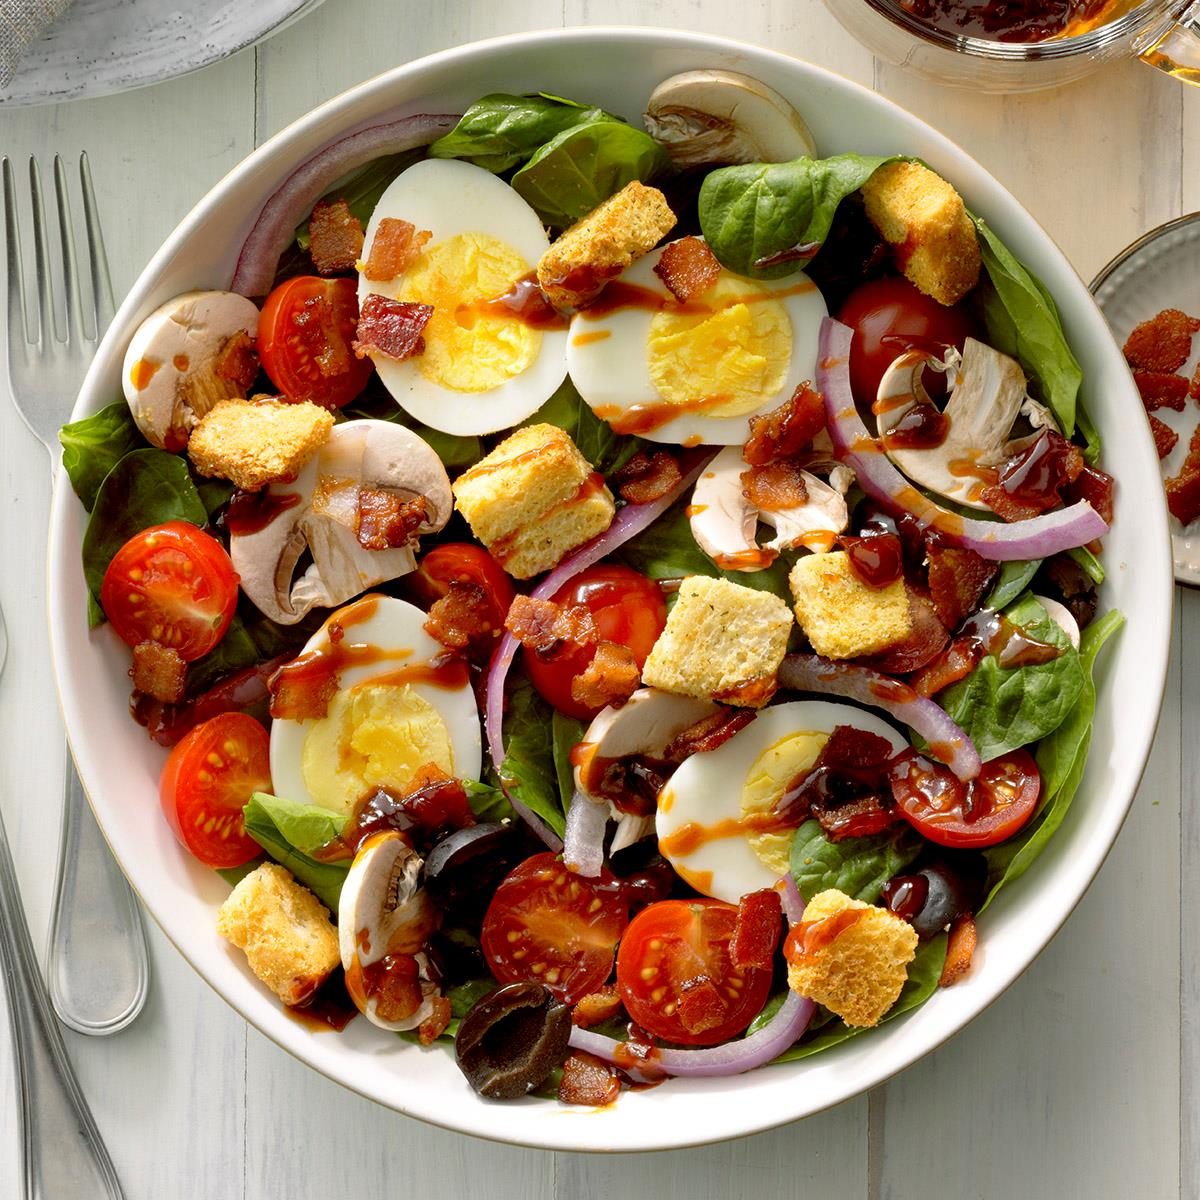 <p>After having a salad like this at a restaurant years ago, I came up with this recipe. It is especially good when the spinach comes right from the garden to the table.</p> <div class="listicle-page__buttons"> <div class="listicle-page__cta-button"><a href='https://www.tasteofhome.com/recipes/spinach-salad-with-hot-bacon-dressing/'>Go to Recipe</a></div> </div>